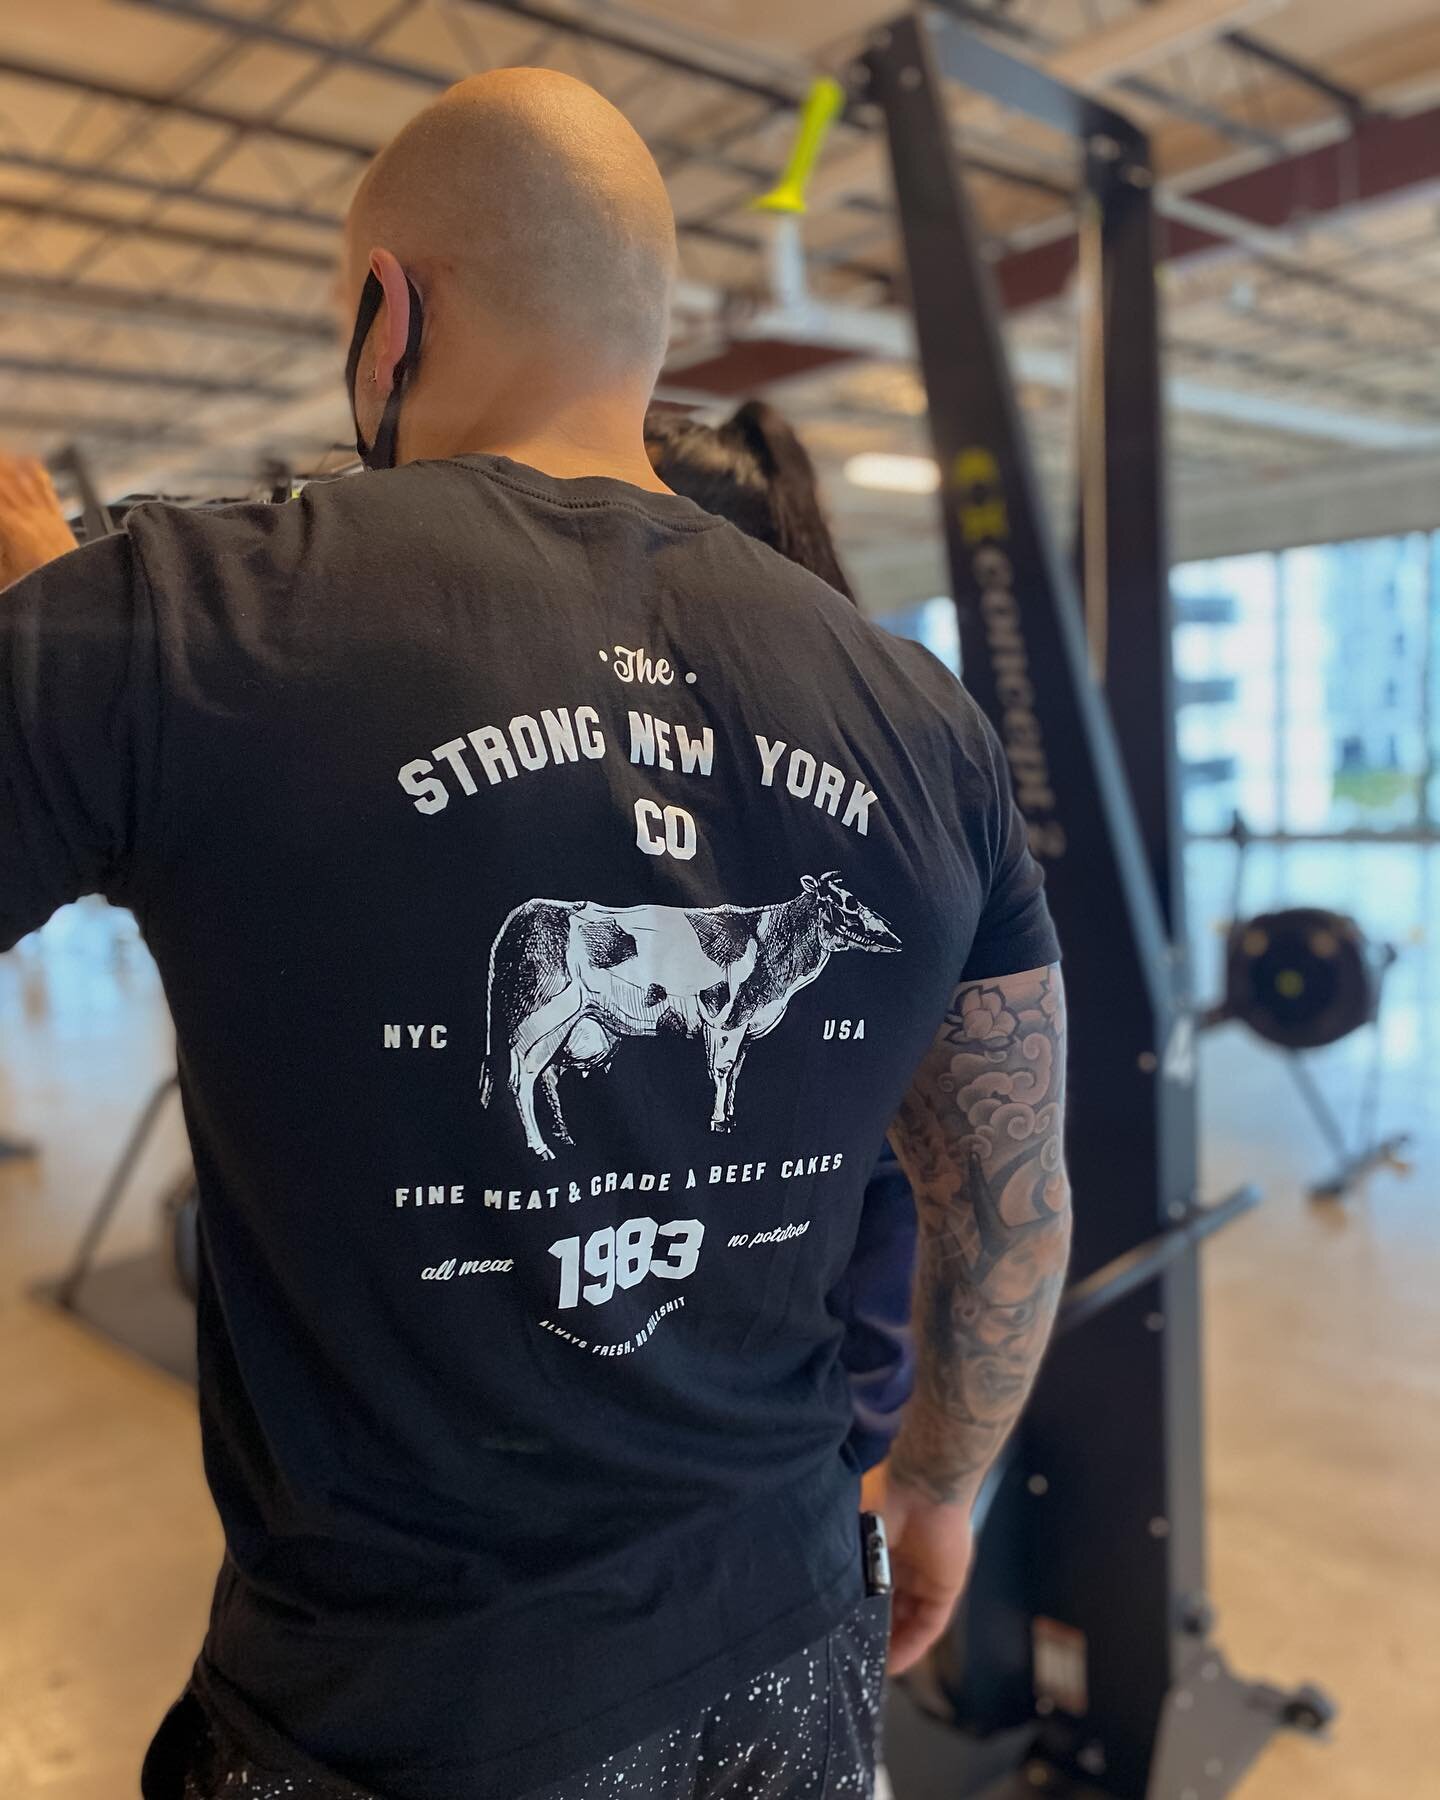 @lukahocevar staying fresh in the All Meat tee 🐄
#strongnewyork #strongapparel #gradeabeef